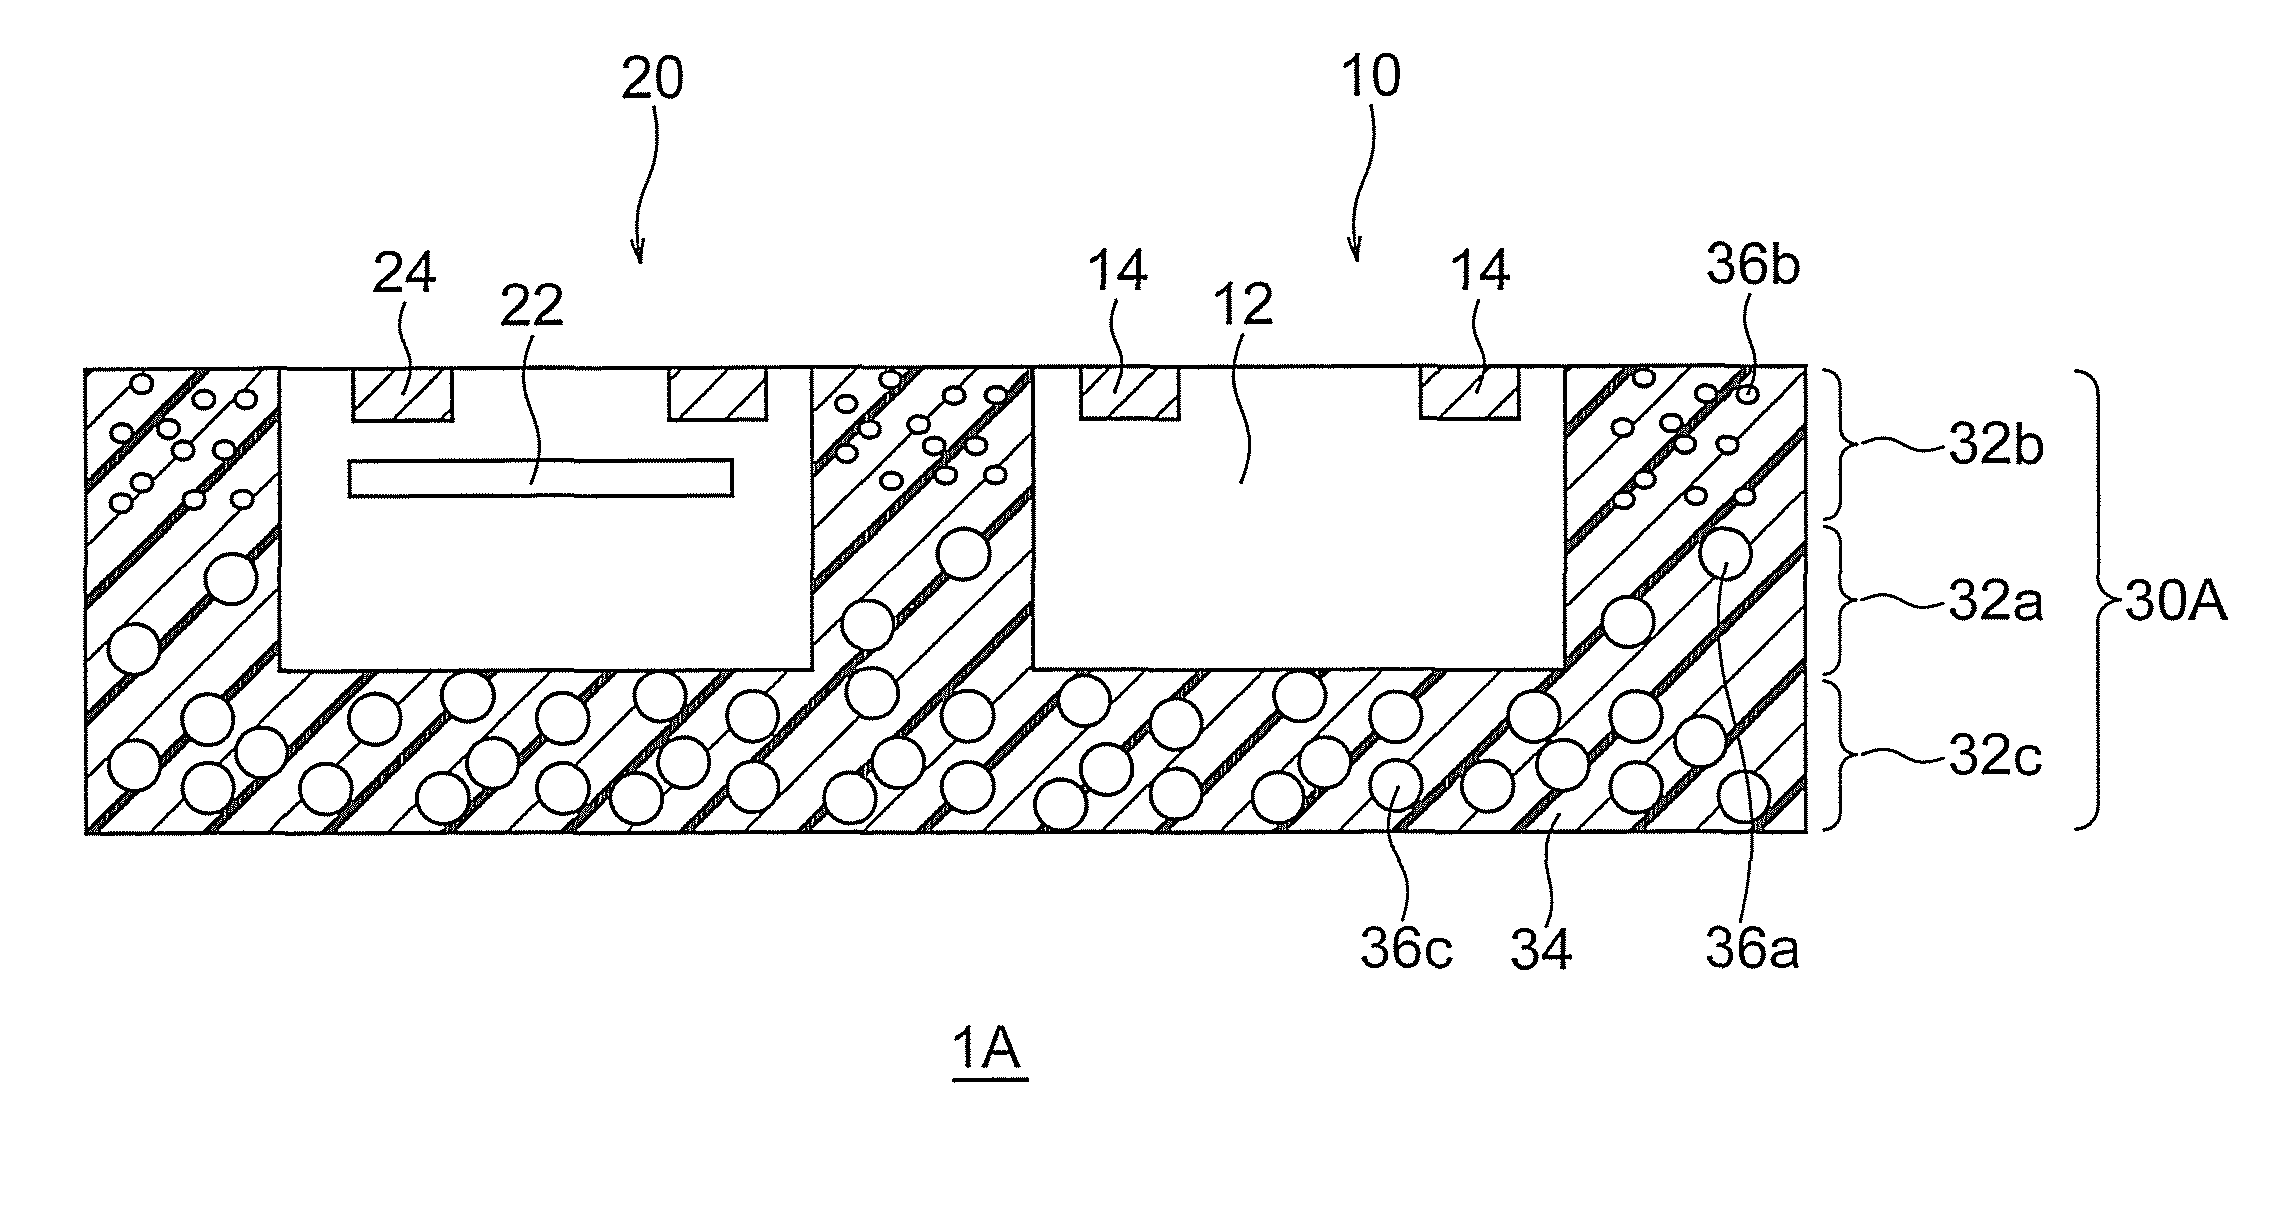 Semiconductor device having an adhesive portion with a stacked structure and method for manufacturing the same